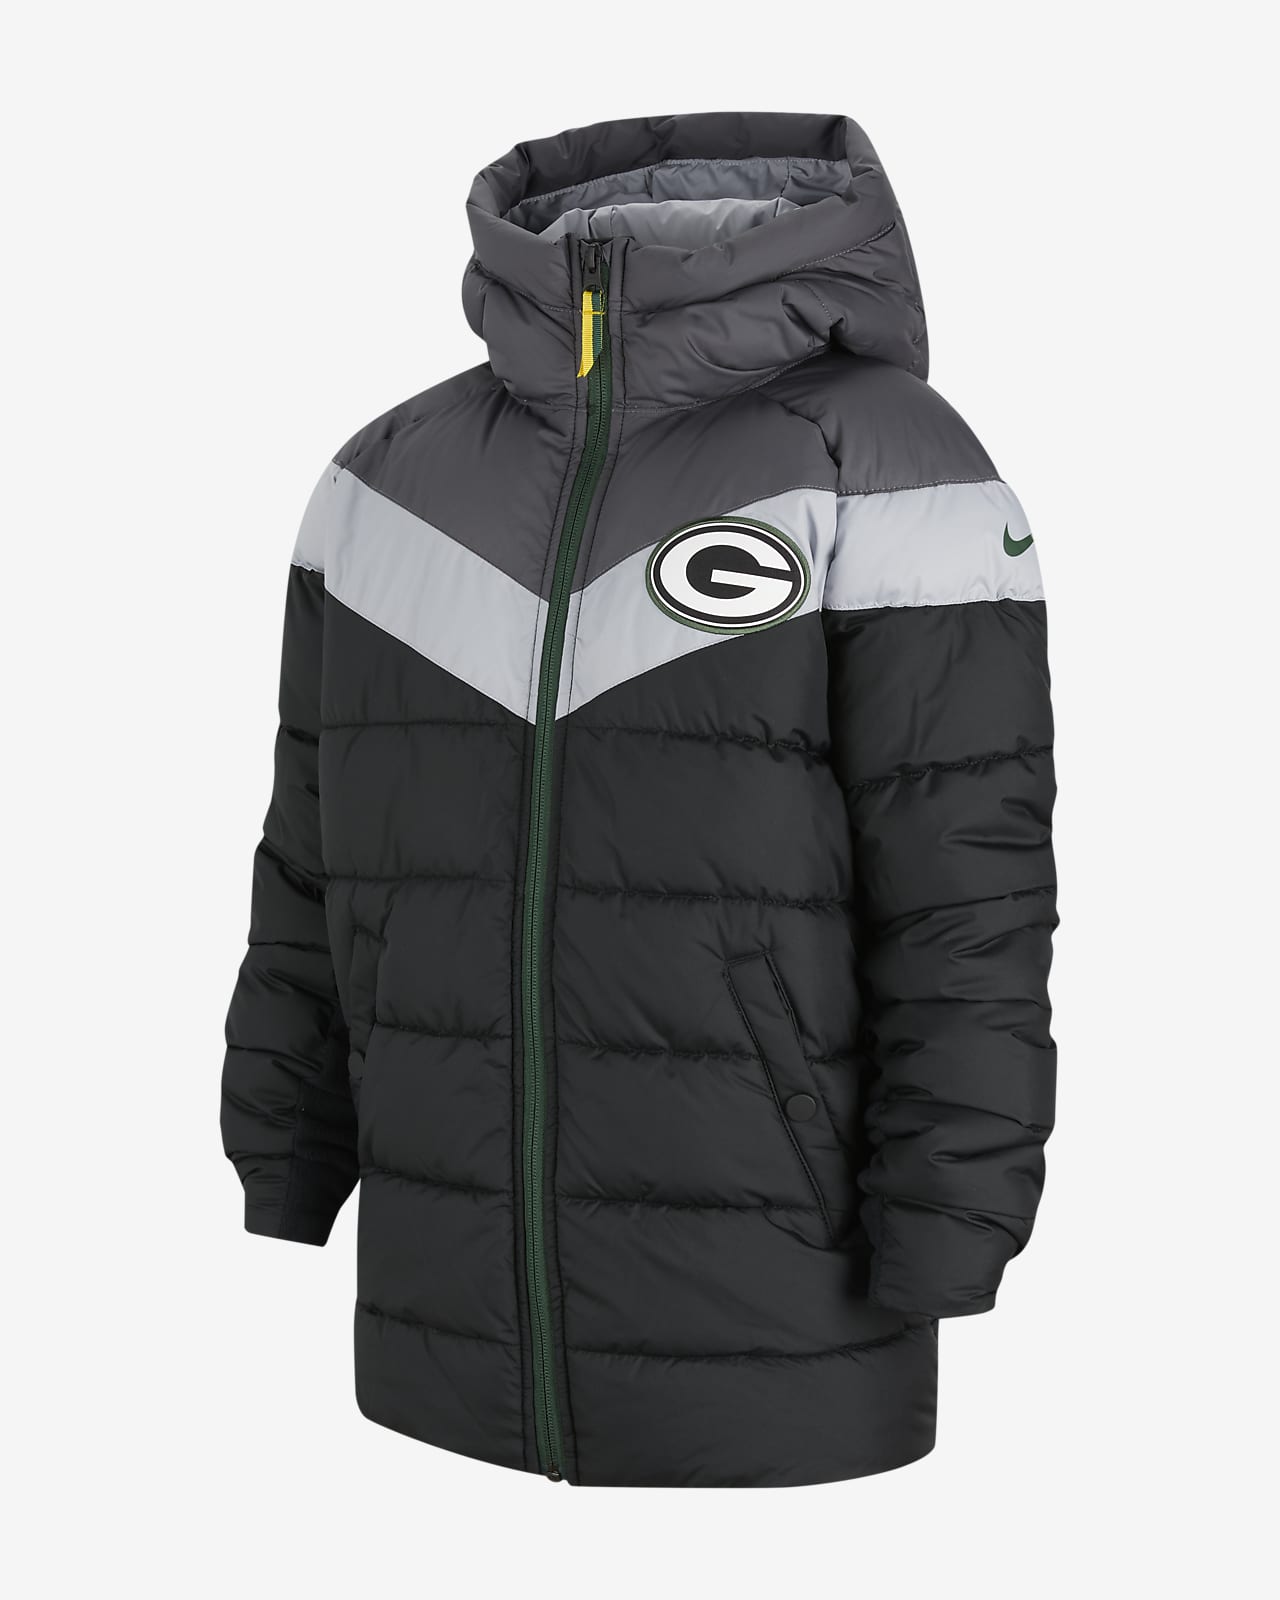 nfl packers jacket